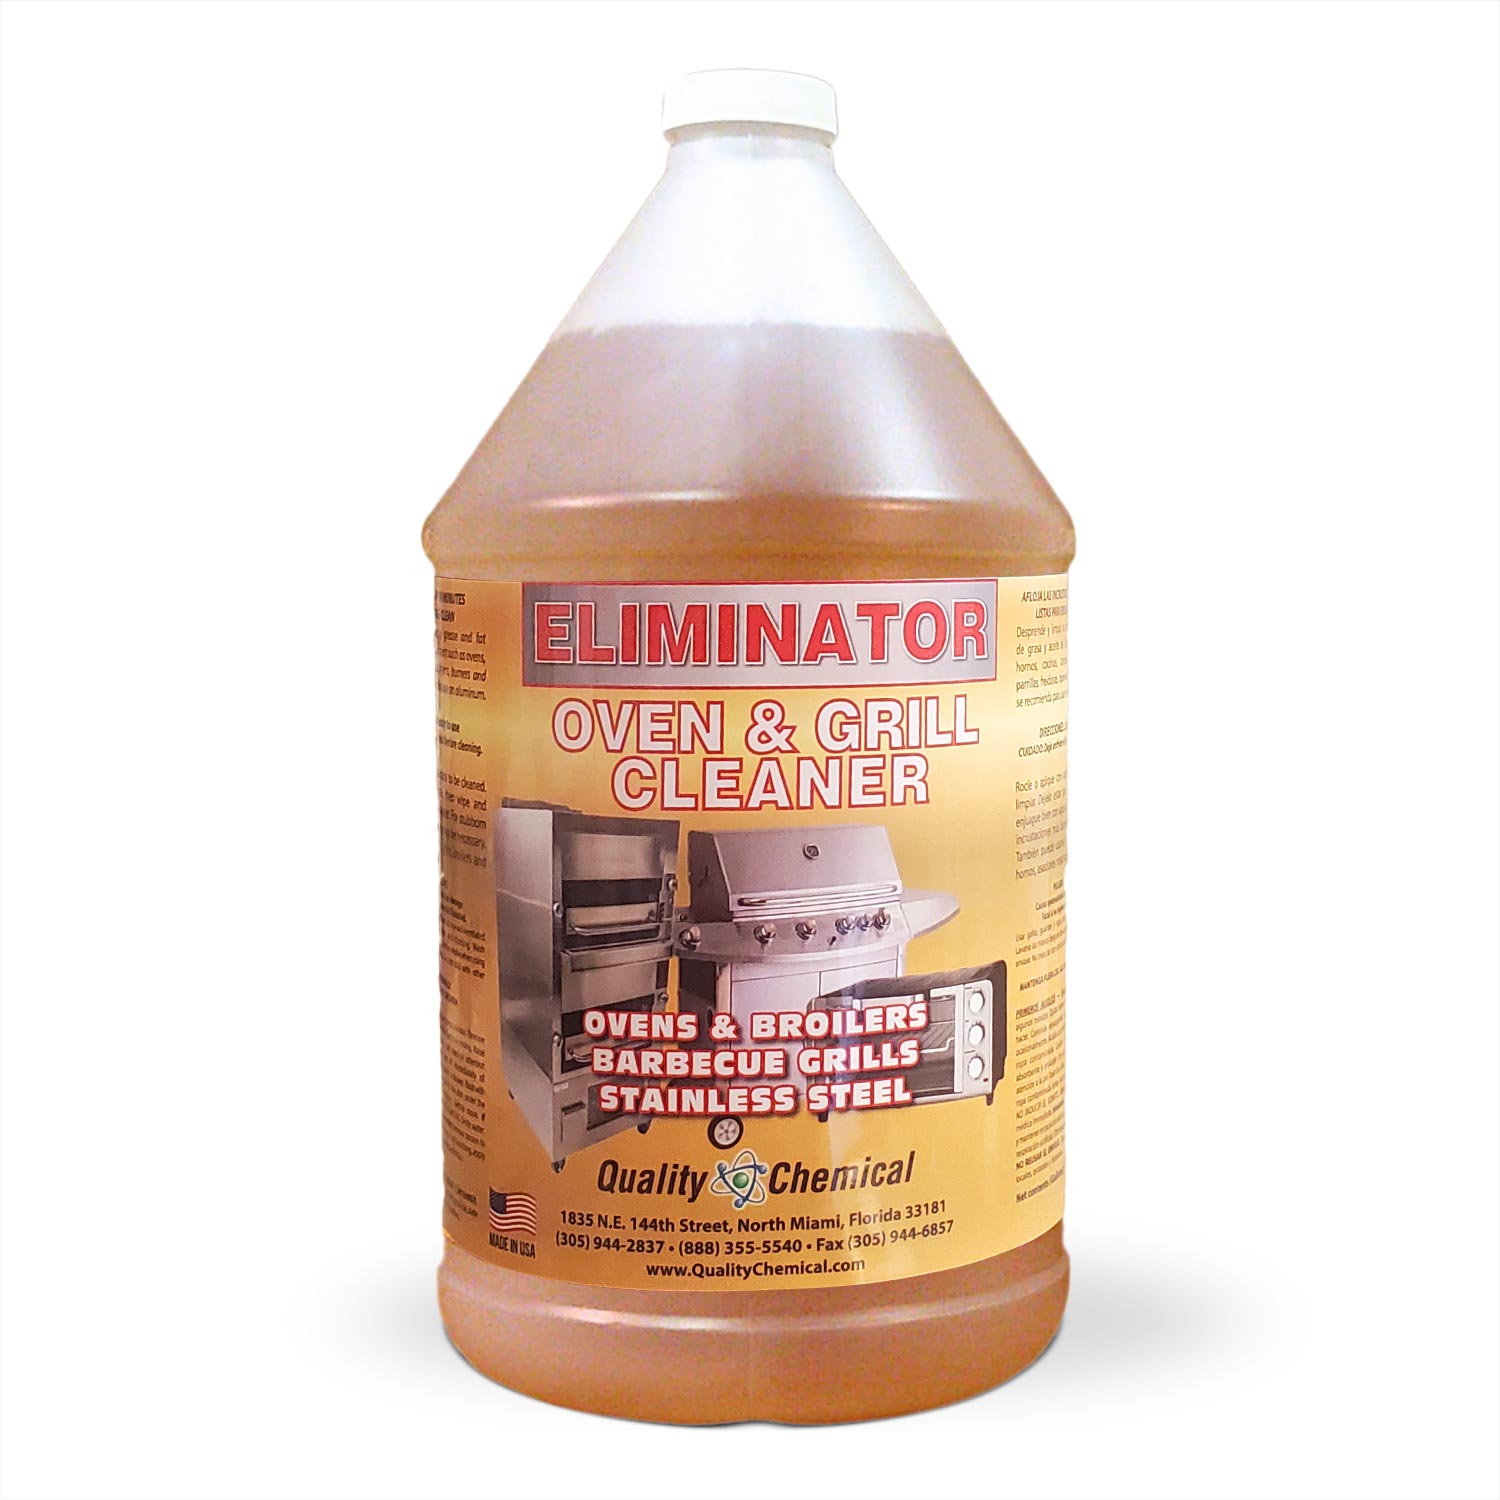 Quality Chemical Company - Eliminator Oven and Grill Cleaner